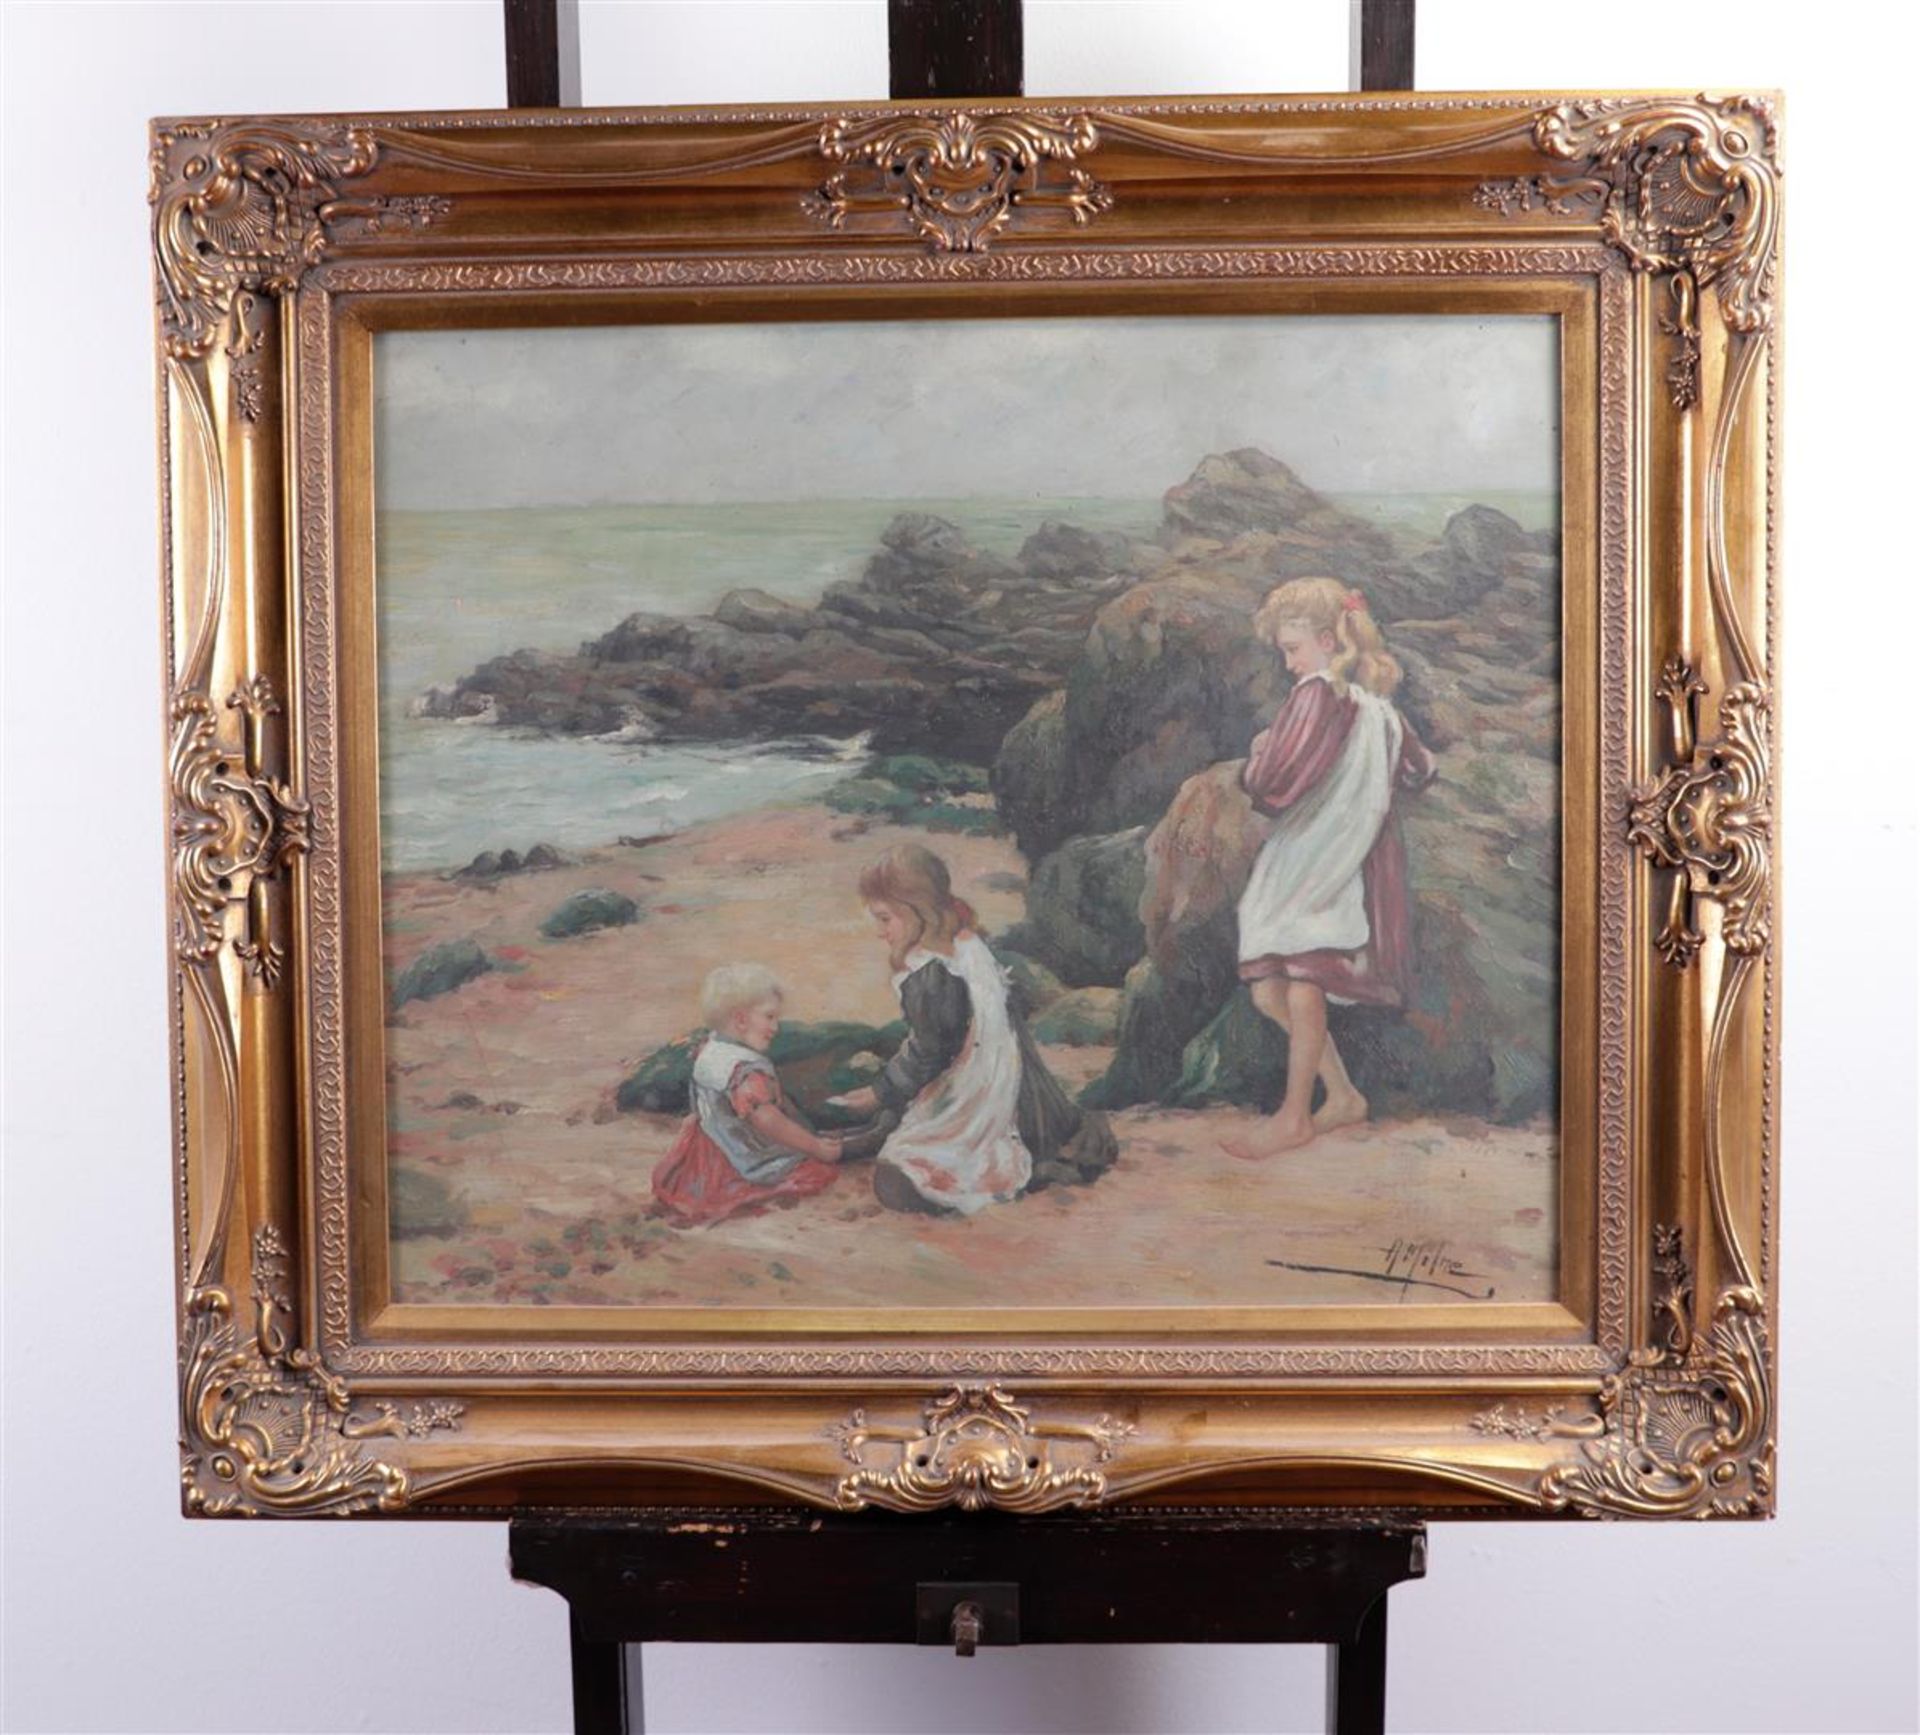 A. Milner, Children playing on the beach, signed (bottom right), oil on canvas,
50 x 60 cm. - Image 2 of 4